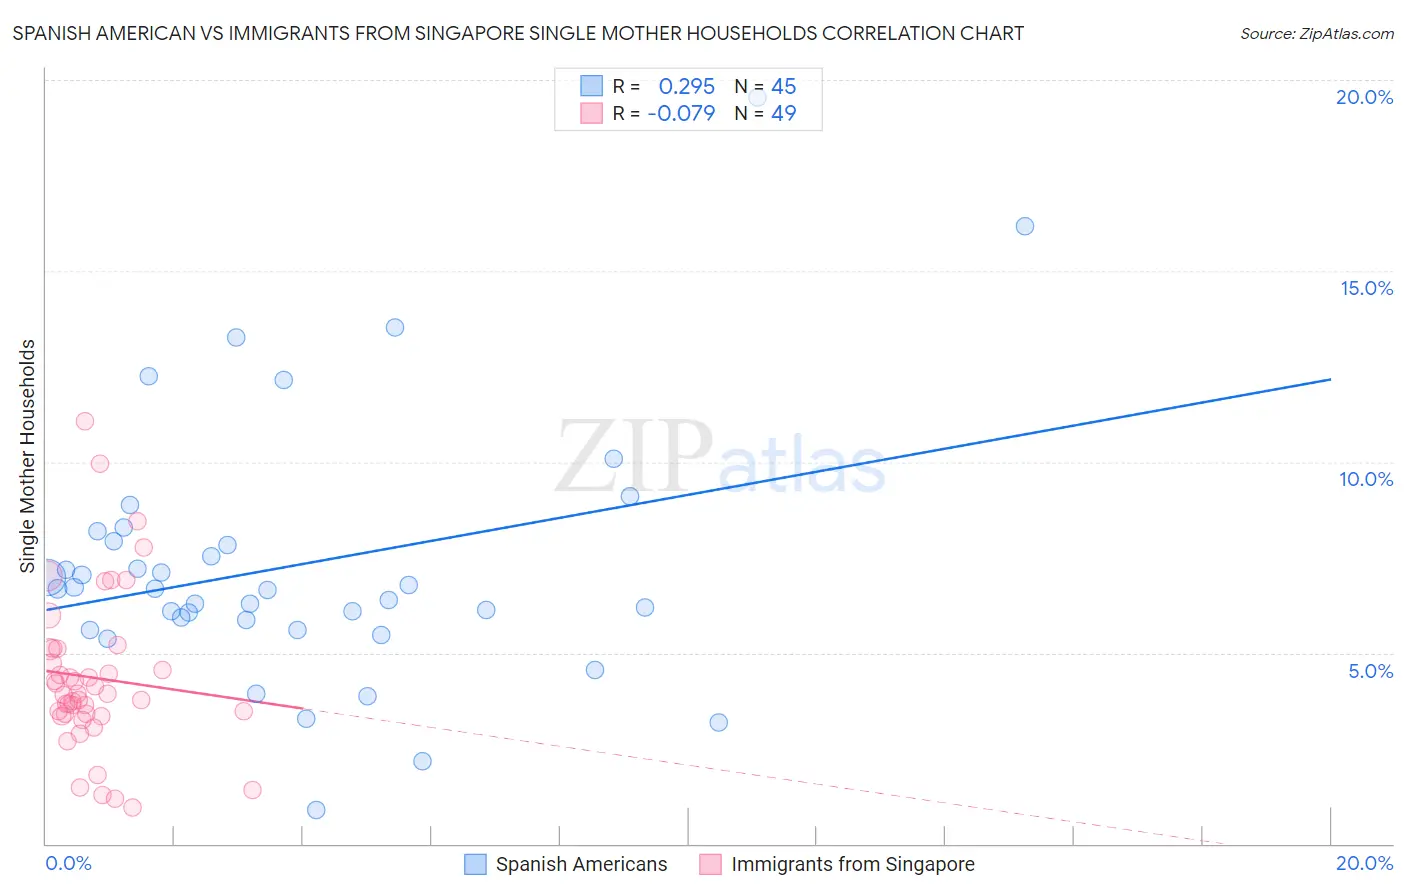 Spanish American vs Immigrants from Singapore Single Mother Households